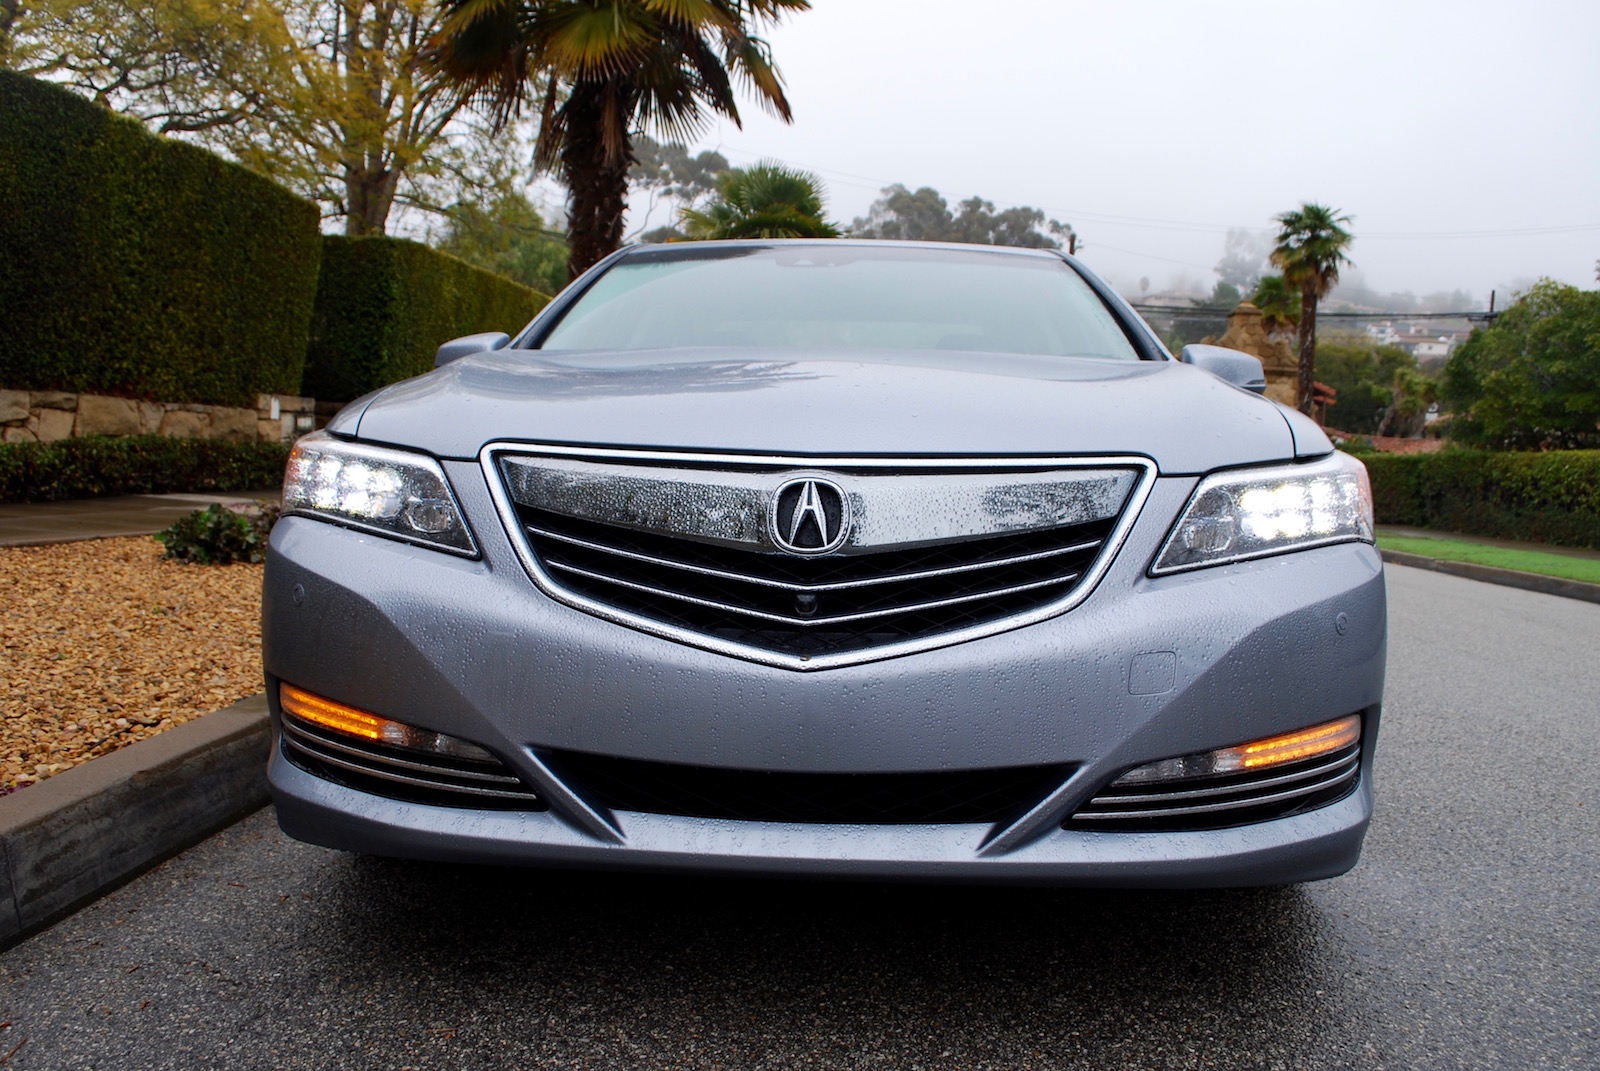 Review: The Acura RLX Hybrid Is Today's Oddity, Tomorrow's Estate